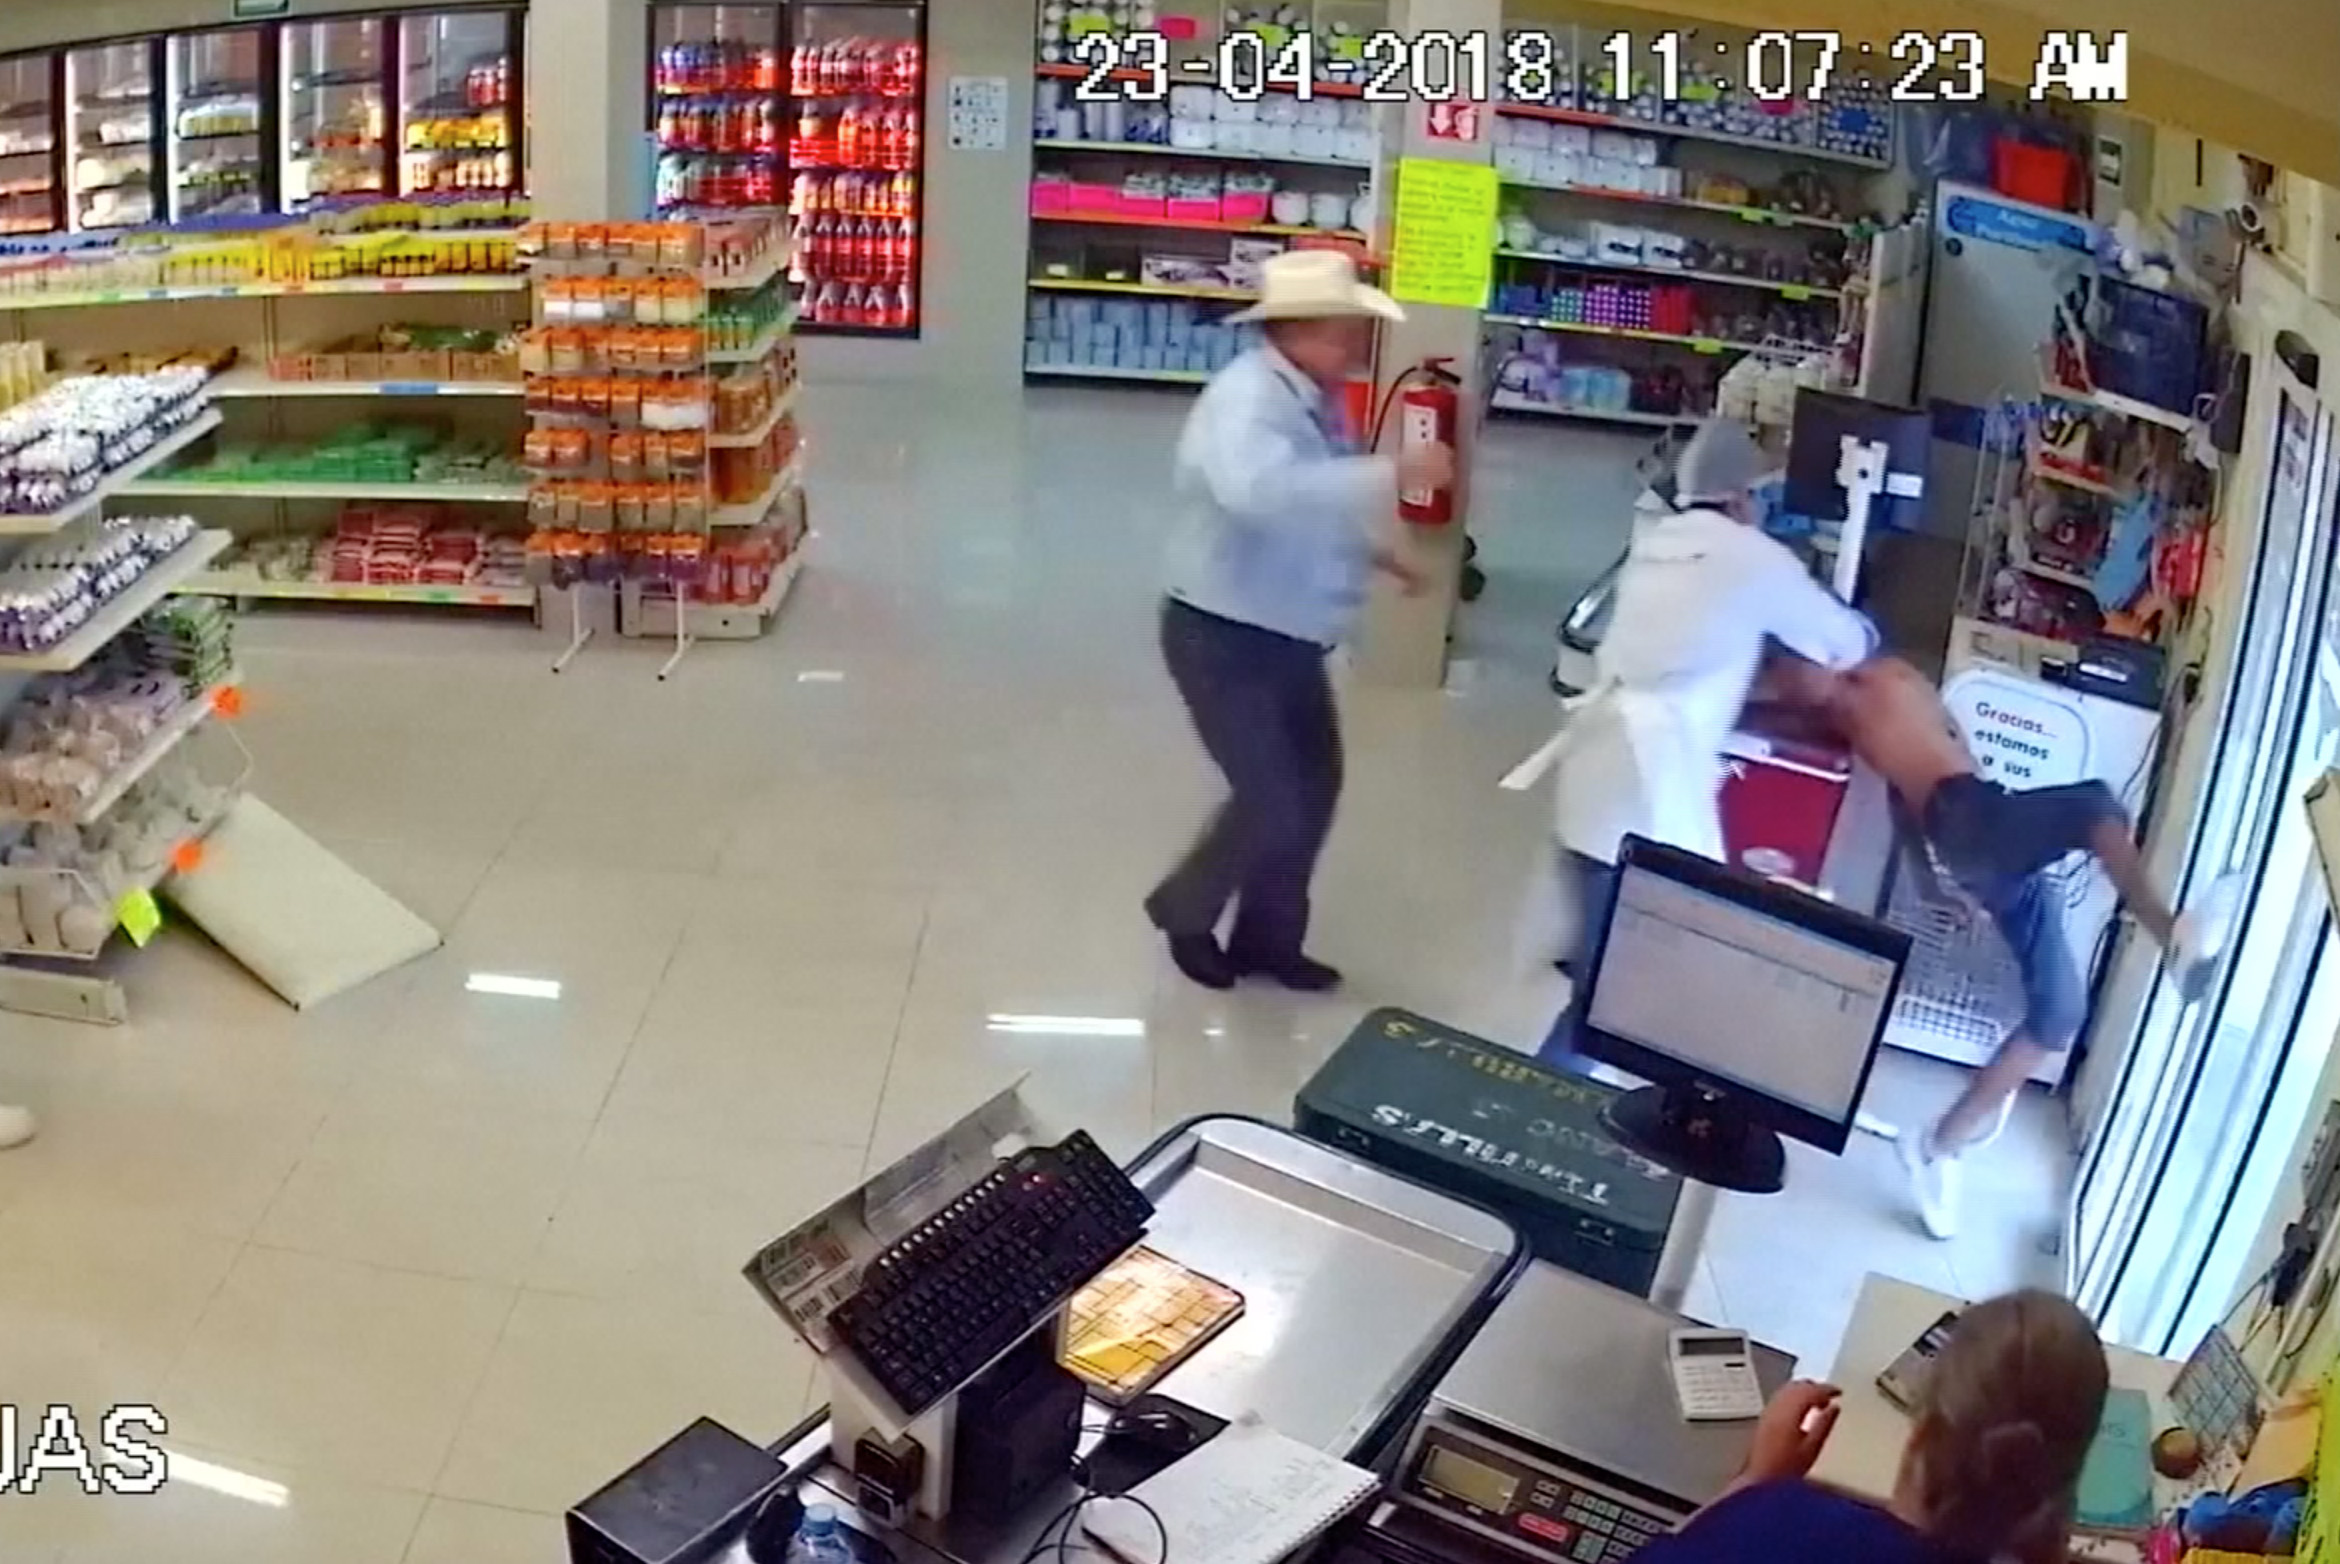 PHOTO: Man wearing cowboy hat tackles would-be armed robber at store in Mexico.